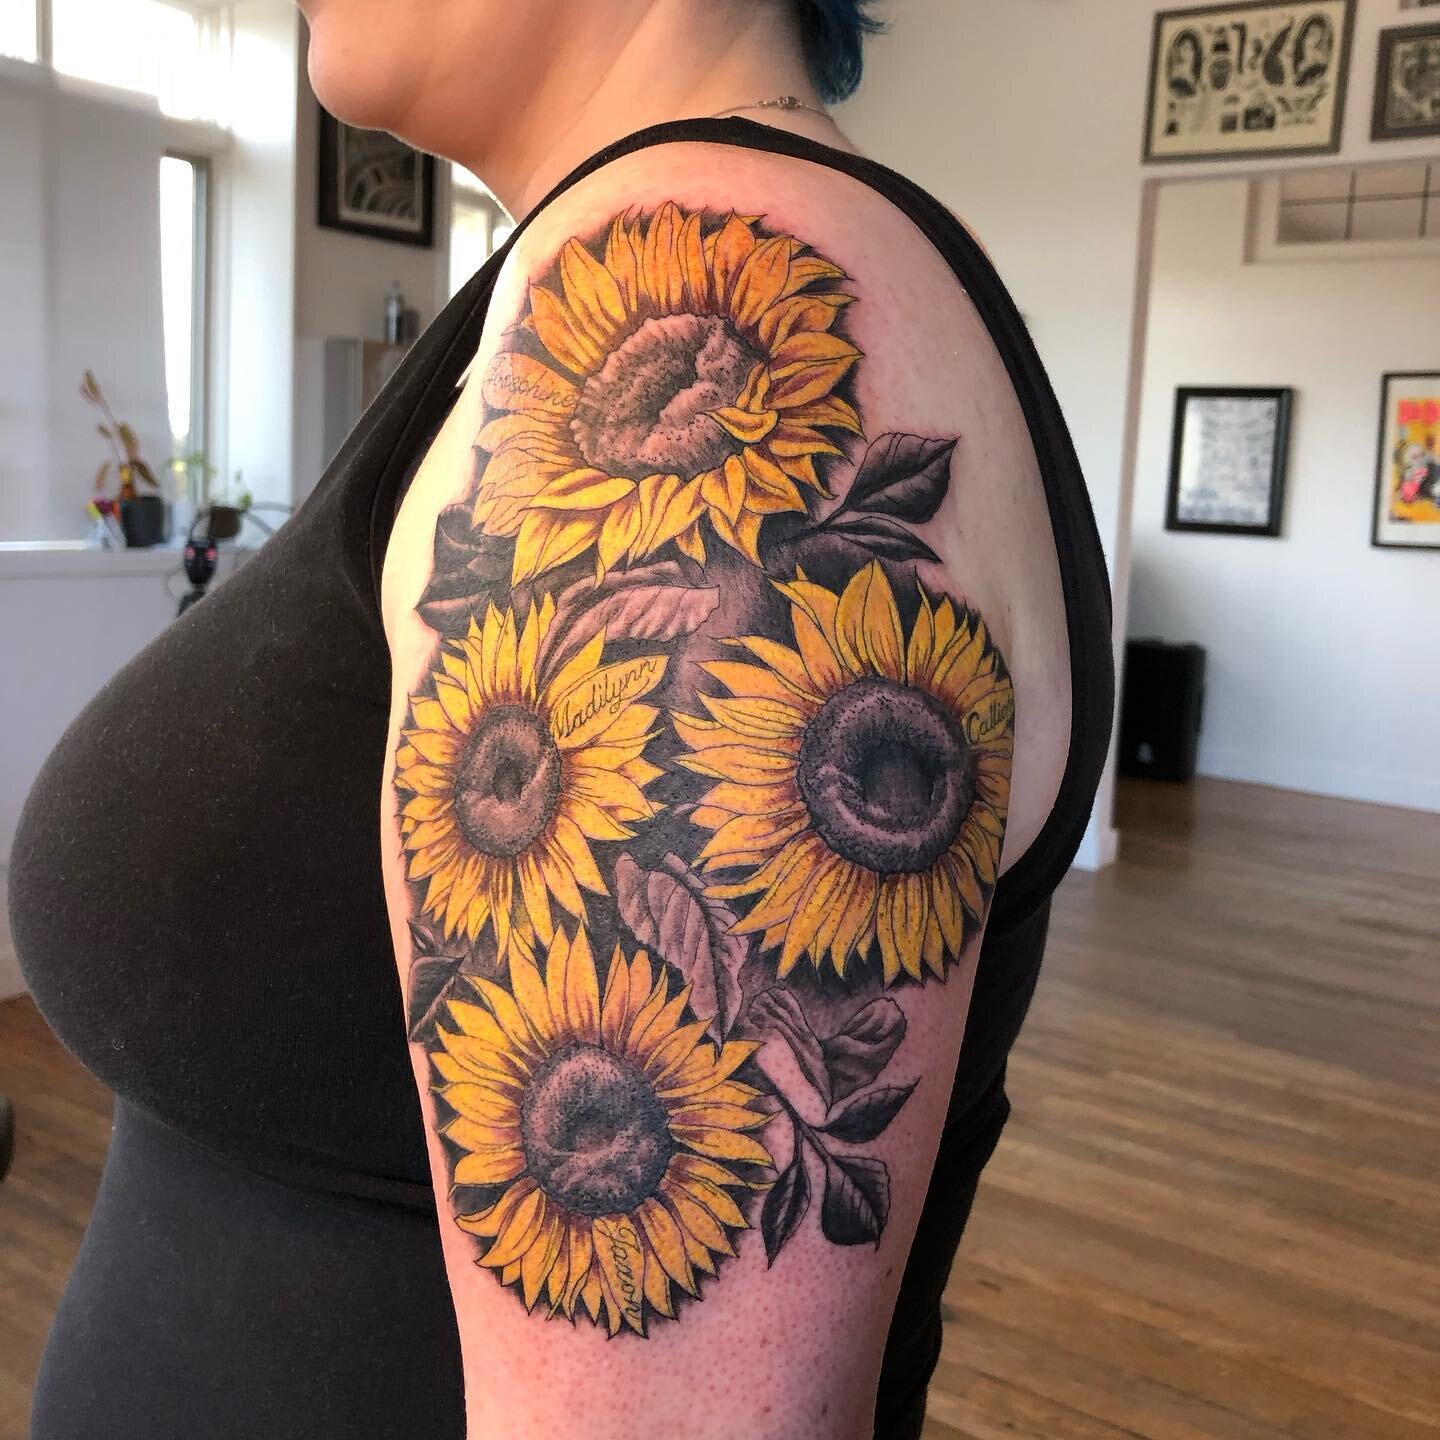 Some fun sunflowers for her four children.